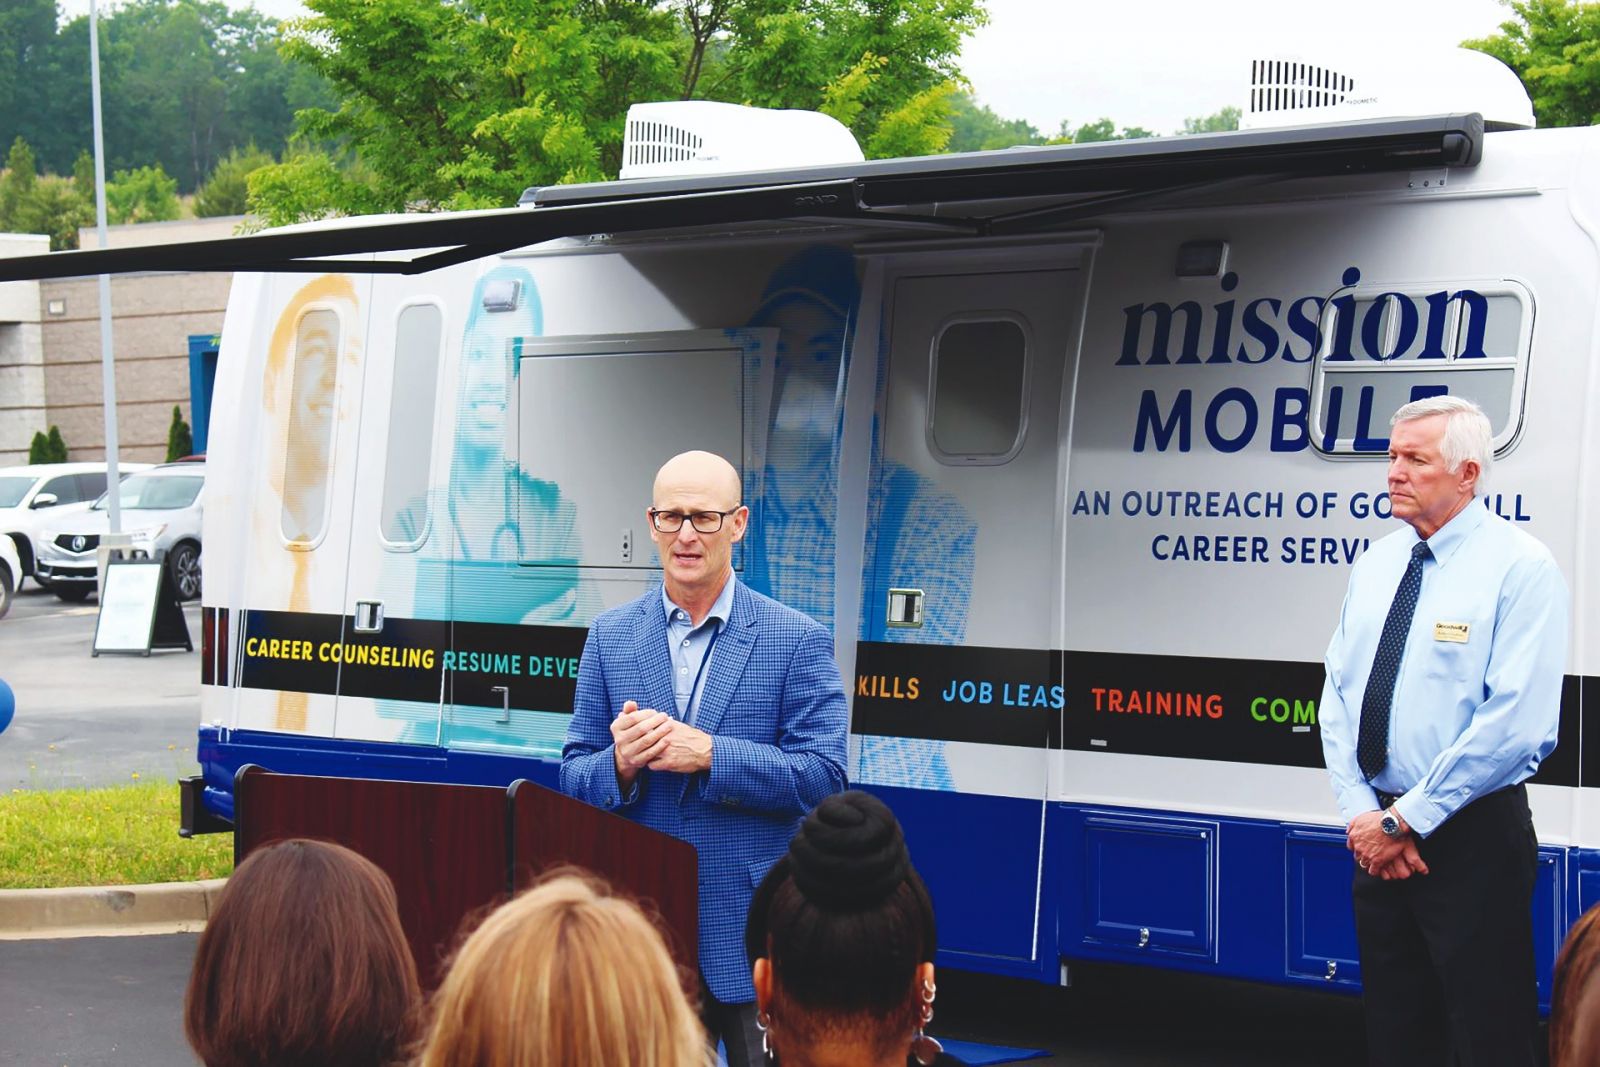 Pat Michaels, CEO of Goodwill Industries, dedicates the mission mobile at the first of two ceremonies introducing the initiative to the community. (Photo/Provided)